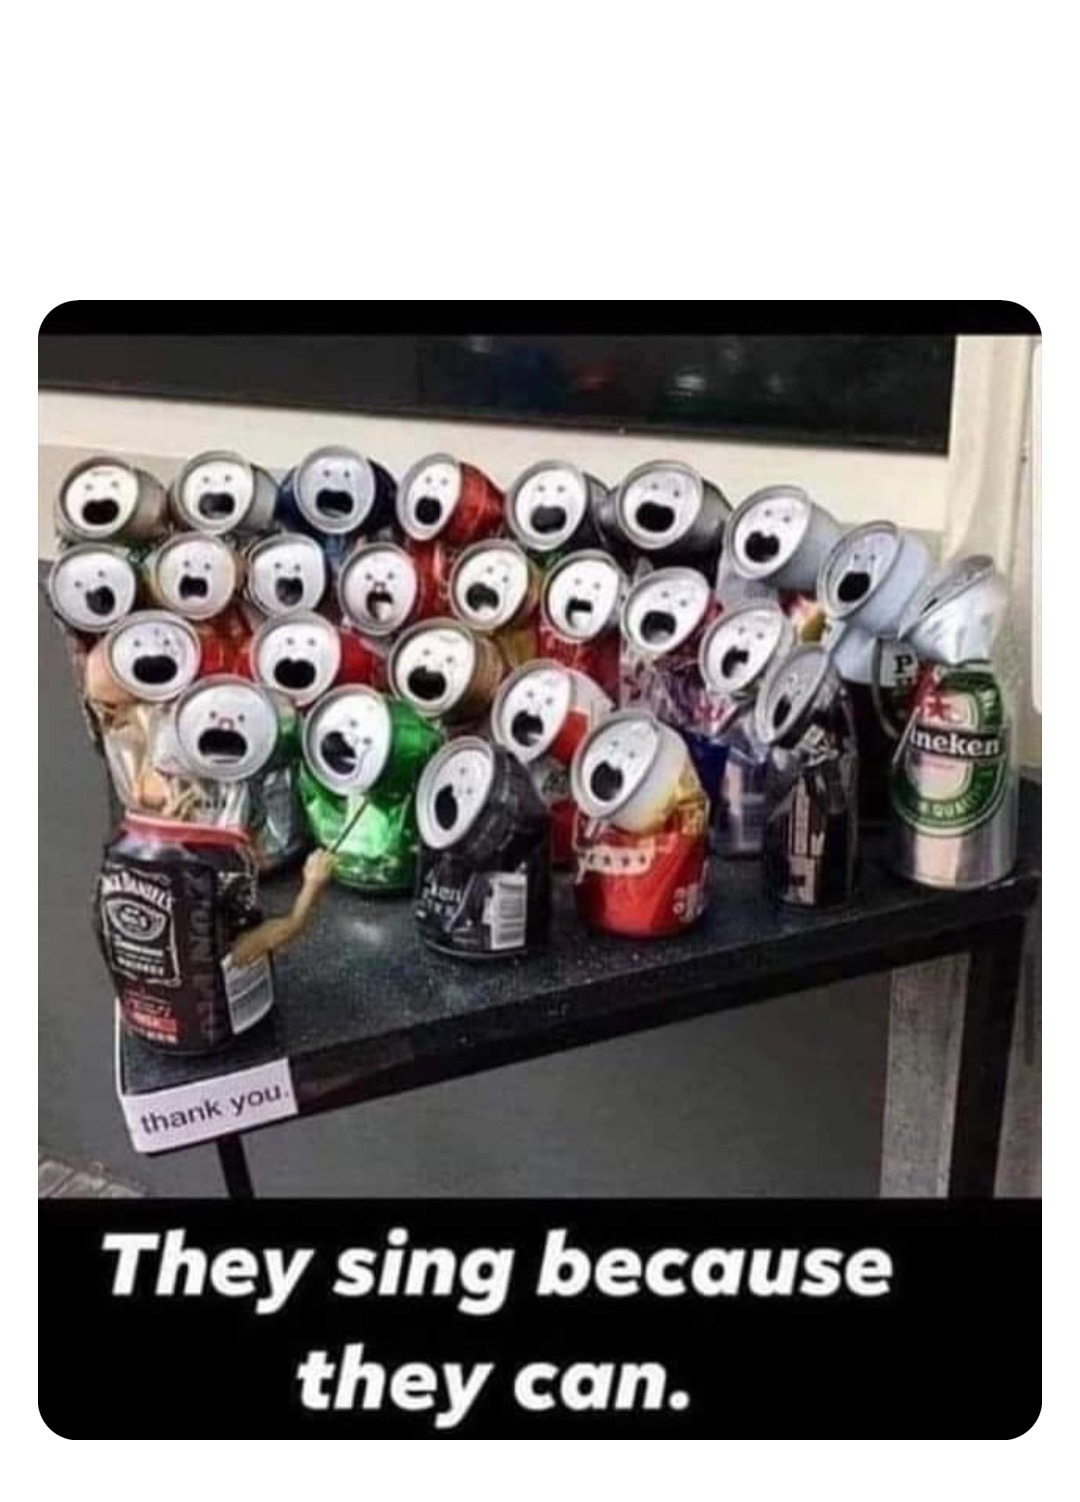 Cans can sing - meme